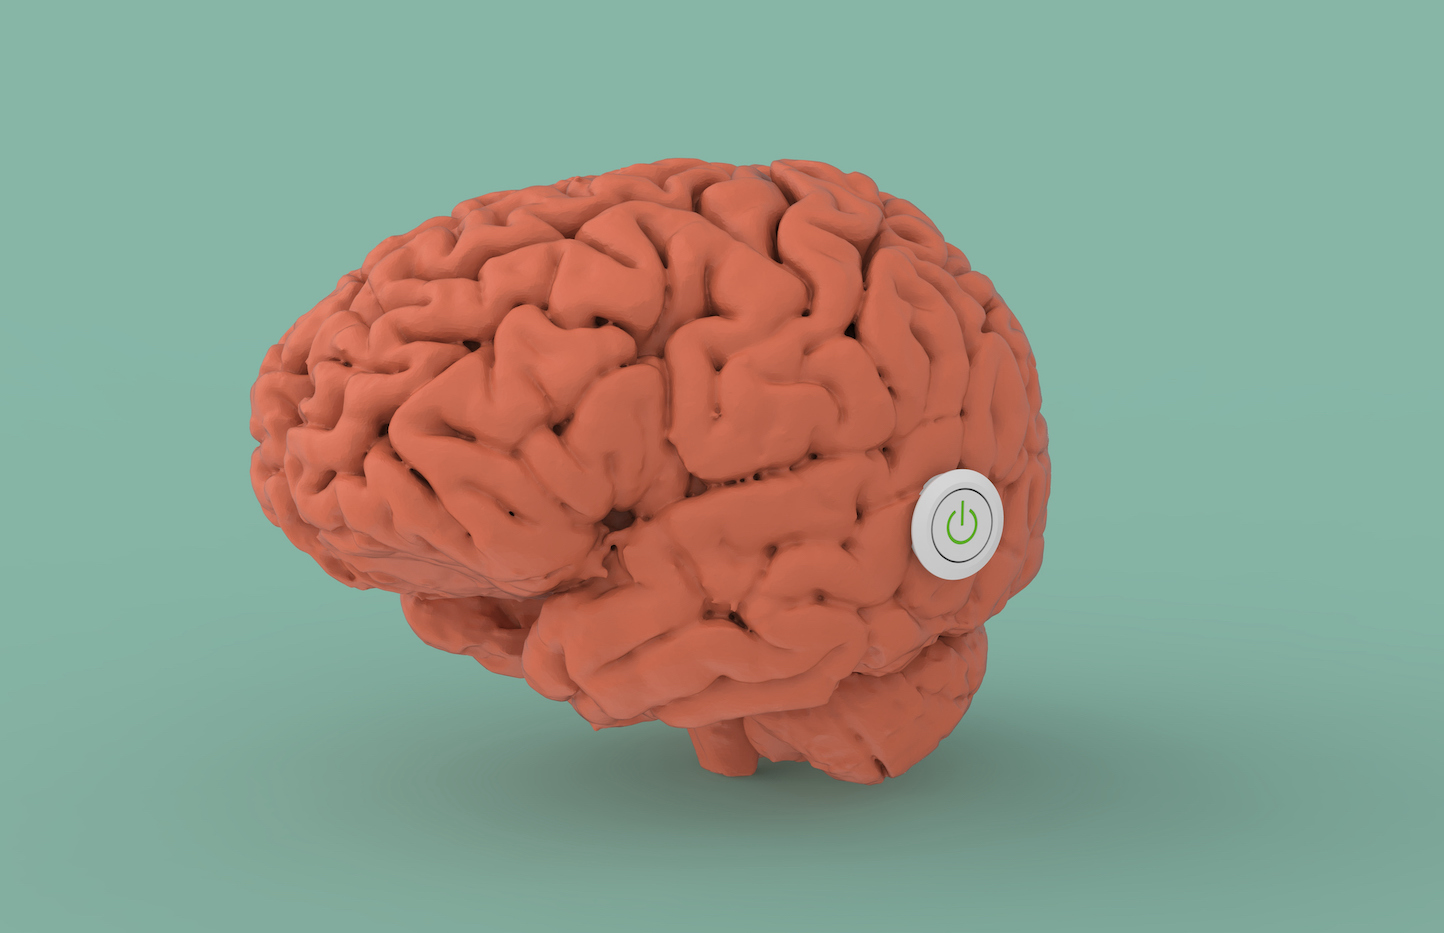 The idea of ​​a brain with an electric 3d shutter button brings the picture